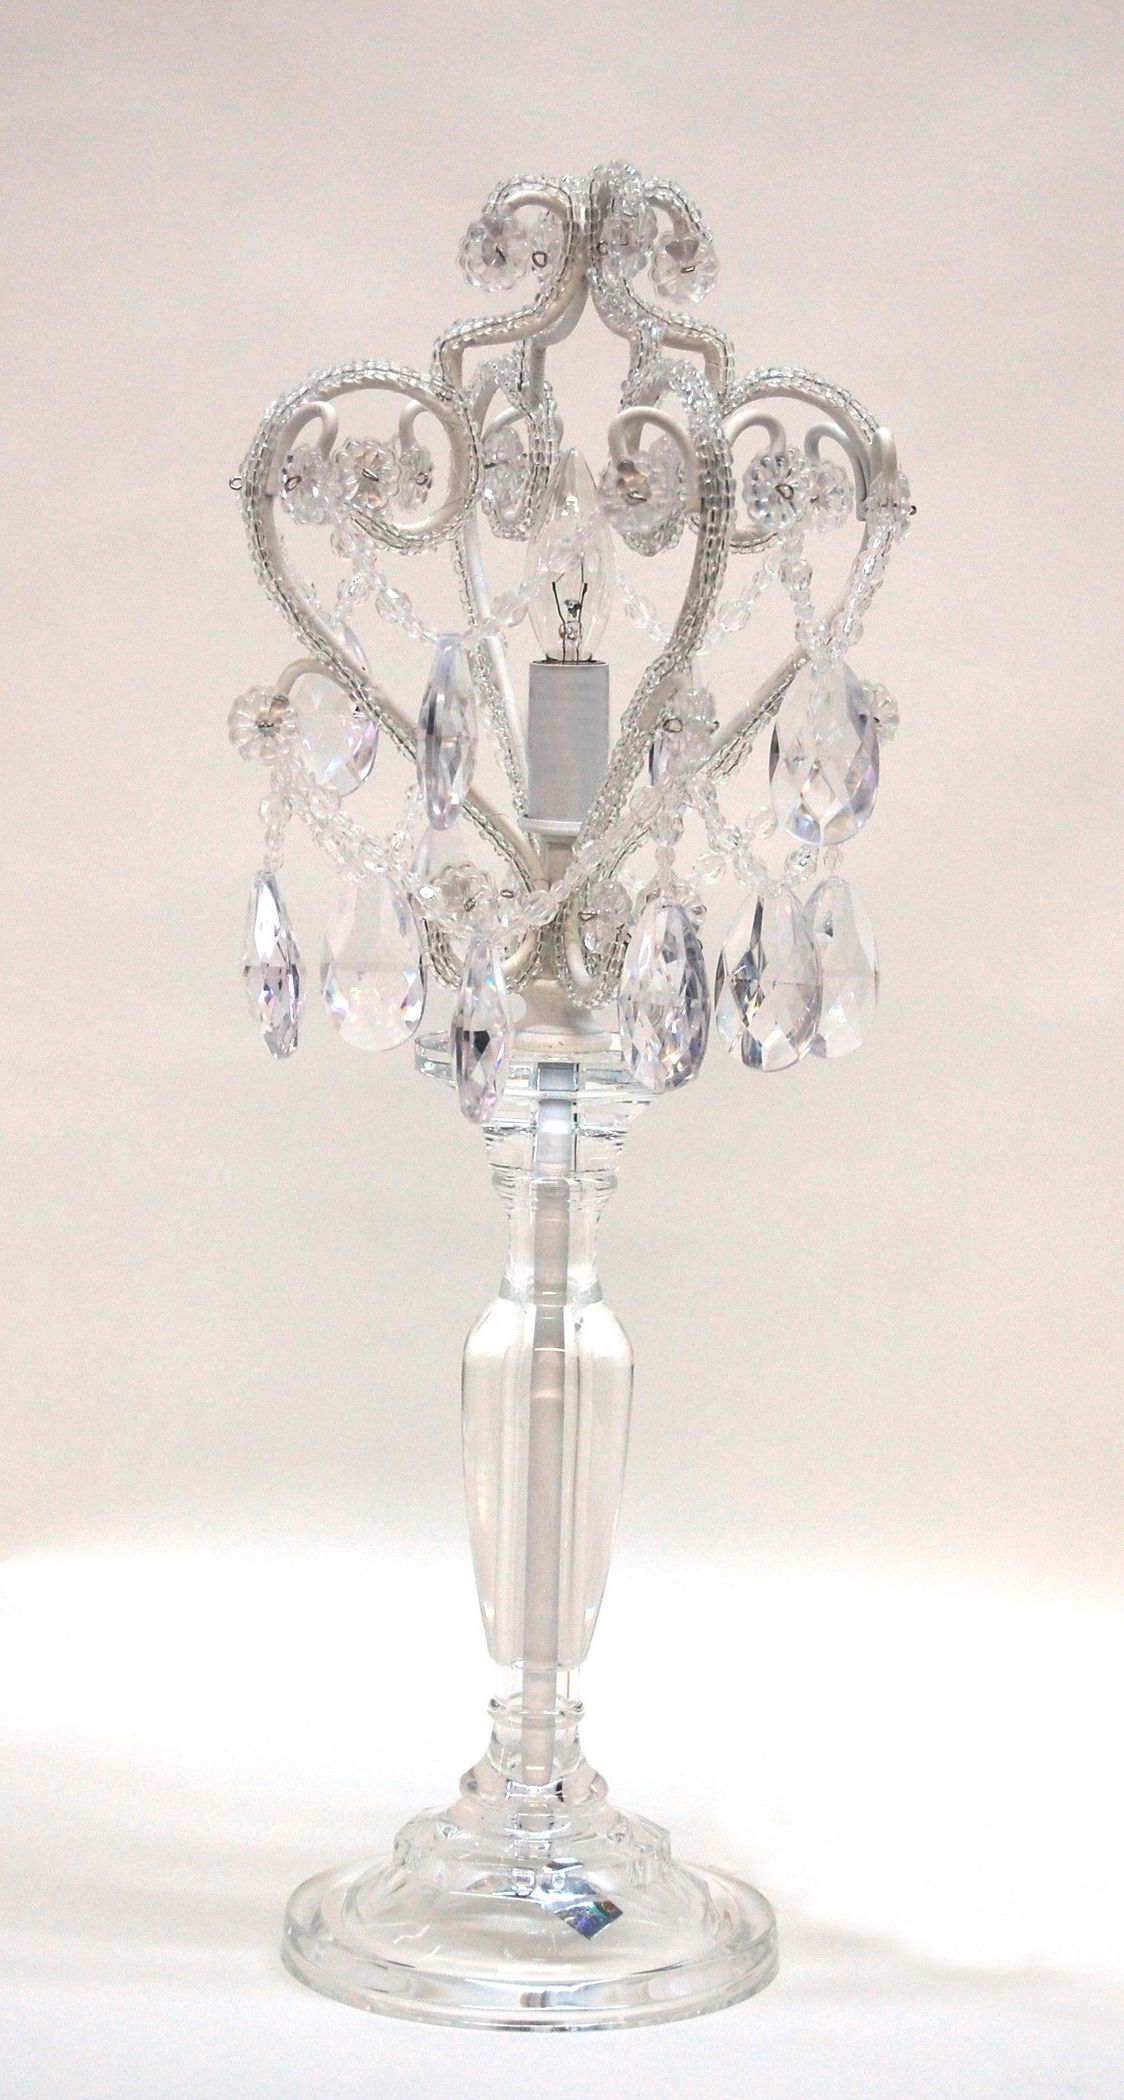 2018 Chandeliers : Small Crystal Chandelier New Nightstands Crystal Glass Intended For Crystal Table Chandeliers (View 11 of 20)